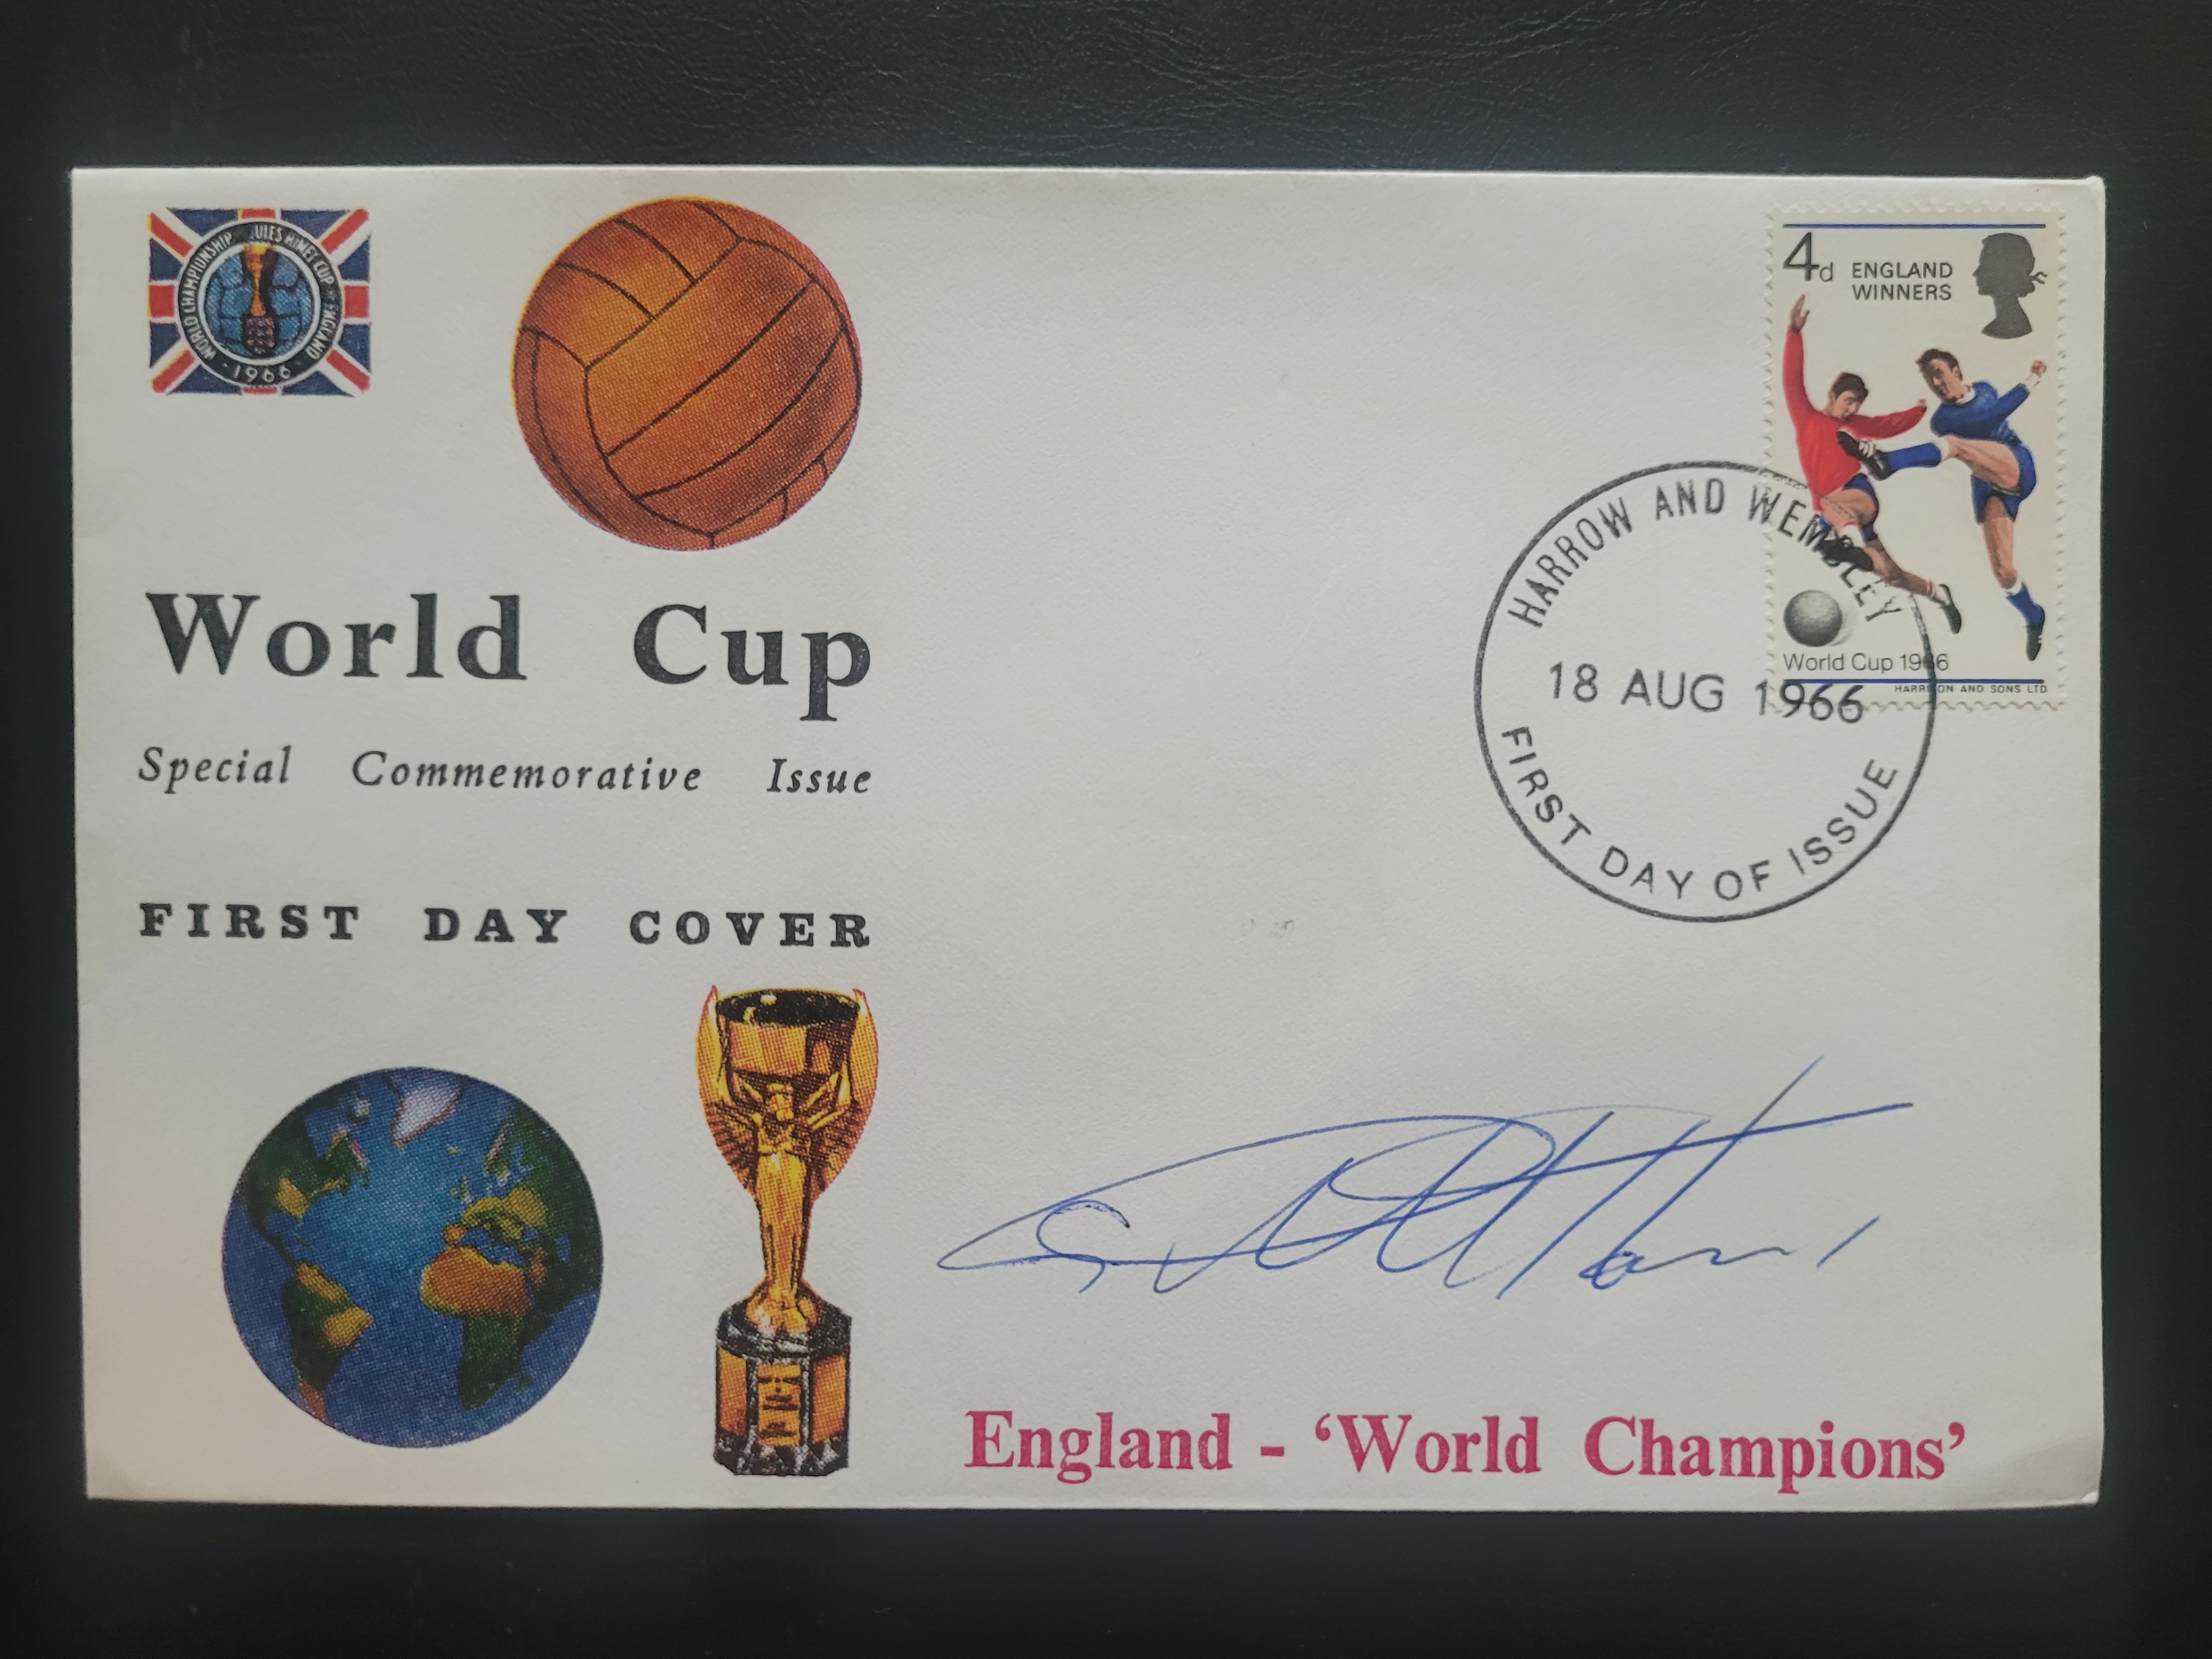 1966 WORLD CUP 1ST DAY COVER FRANKED HARROW & WEMBLEY AUTOGRAPHED BY GEOFF HURST